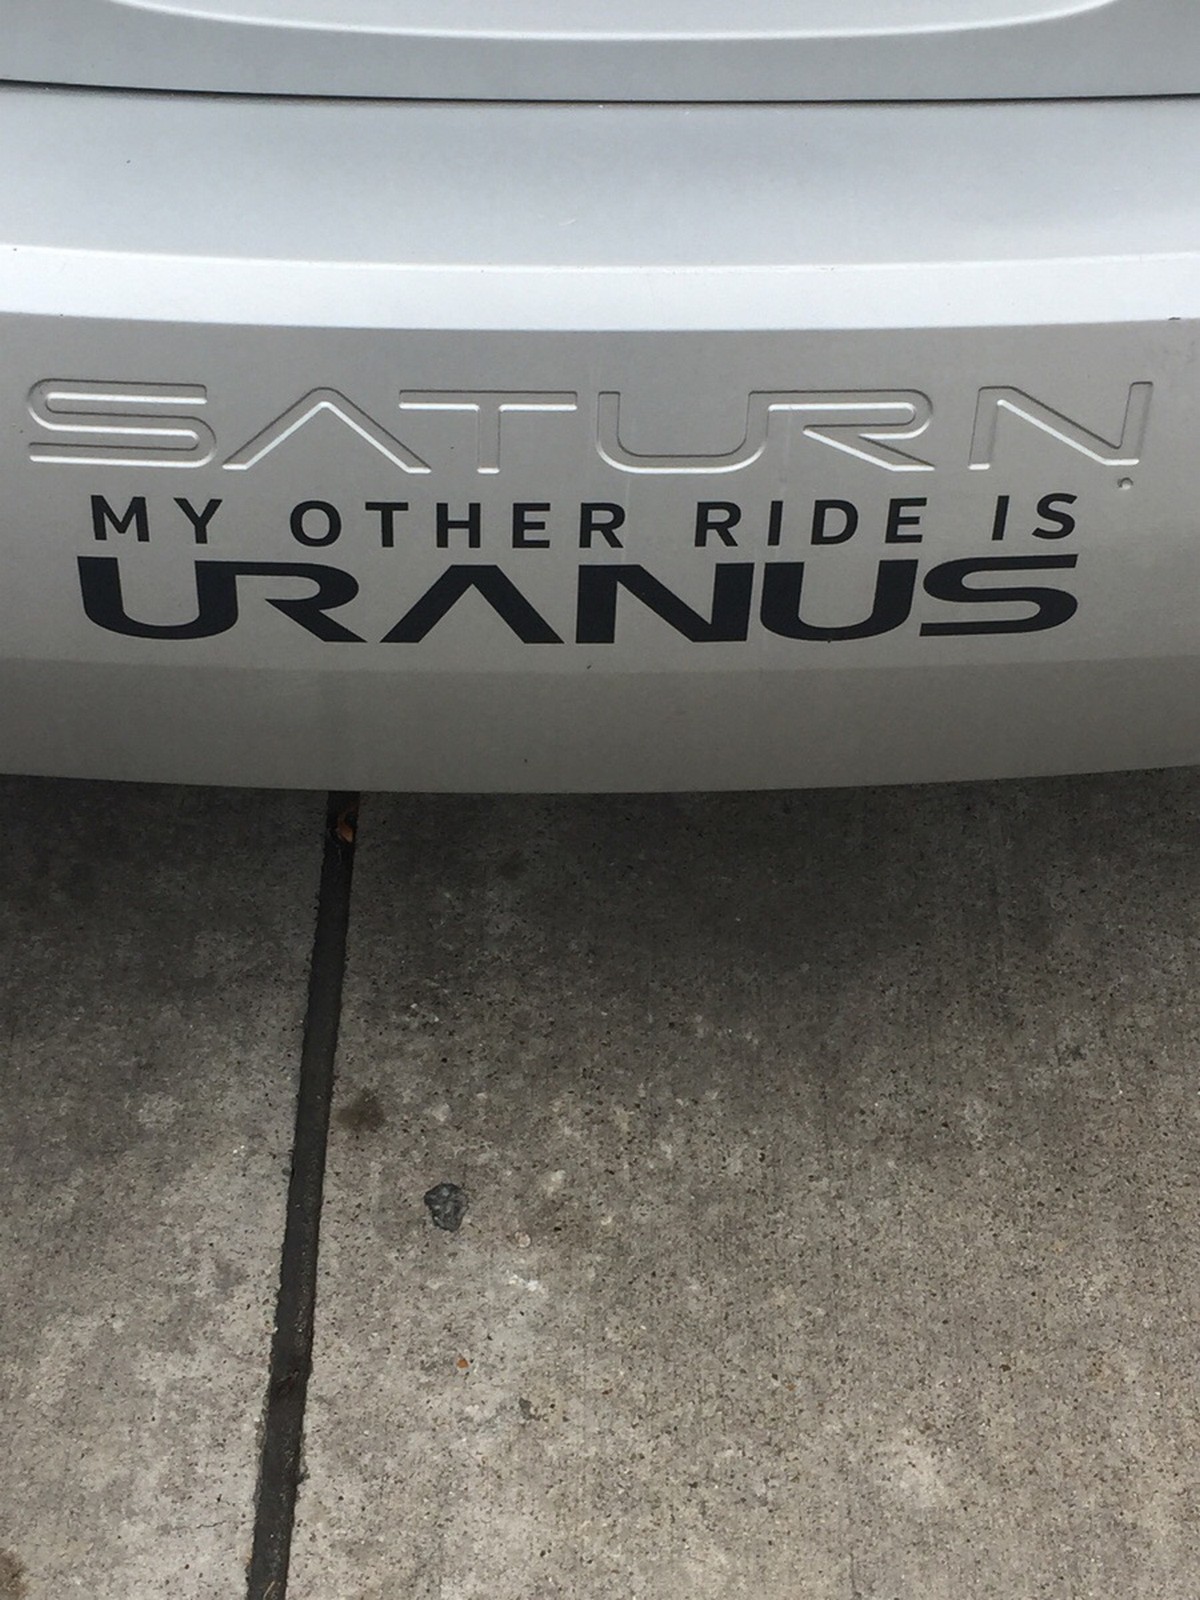 27 Funny Bumper Stickers - EVERY Saturn owner should have this bumper sticker!